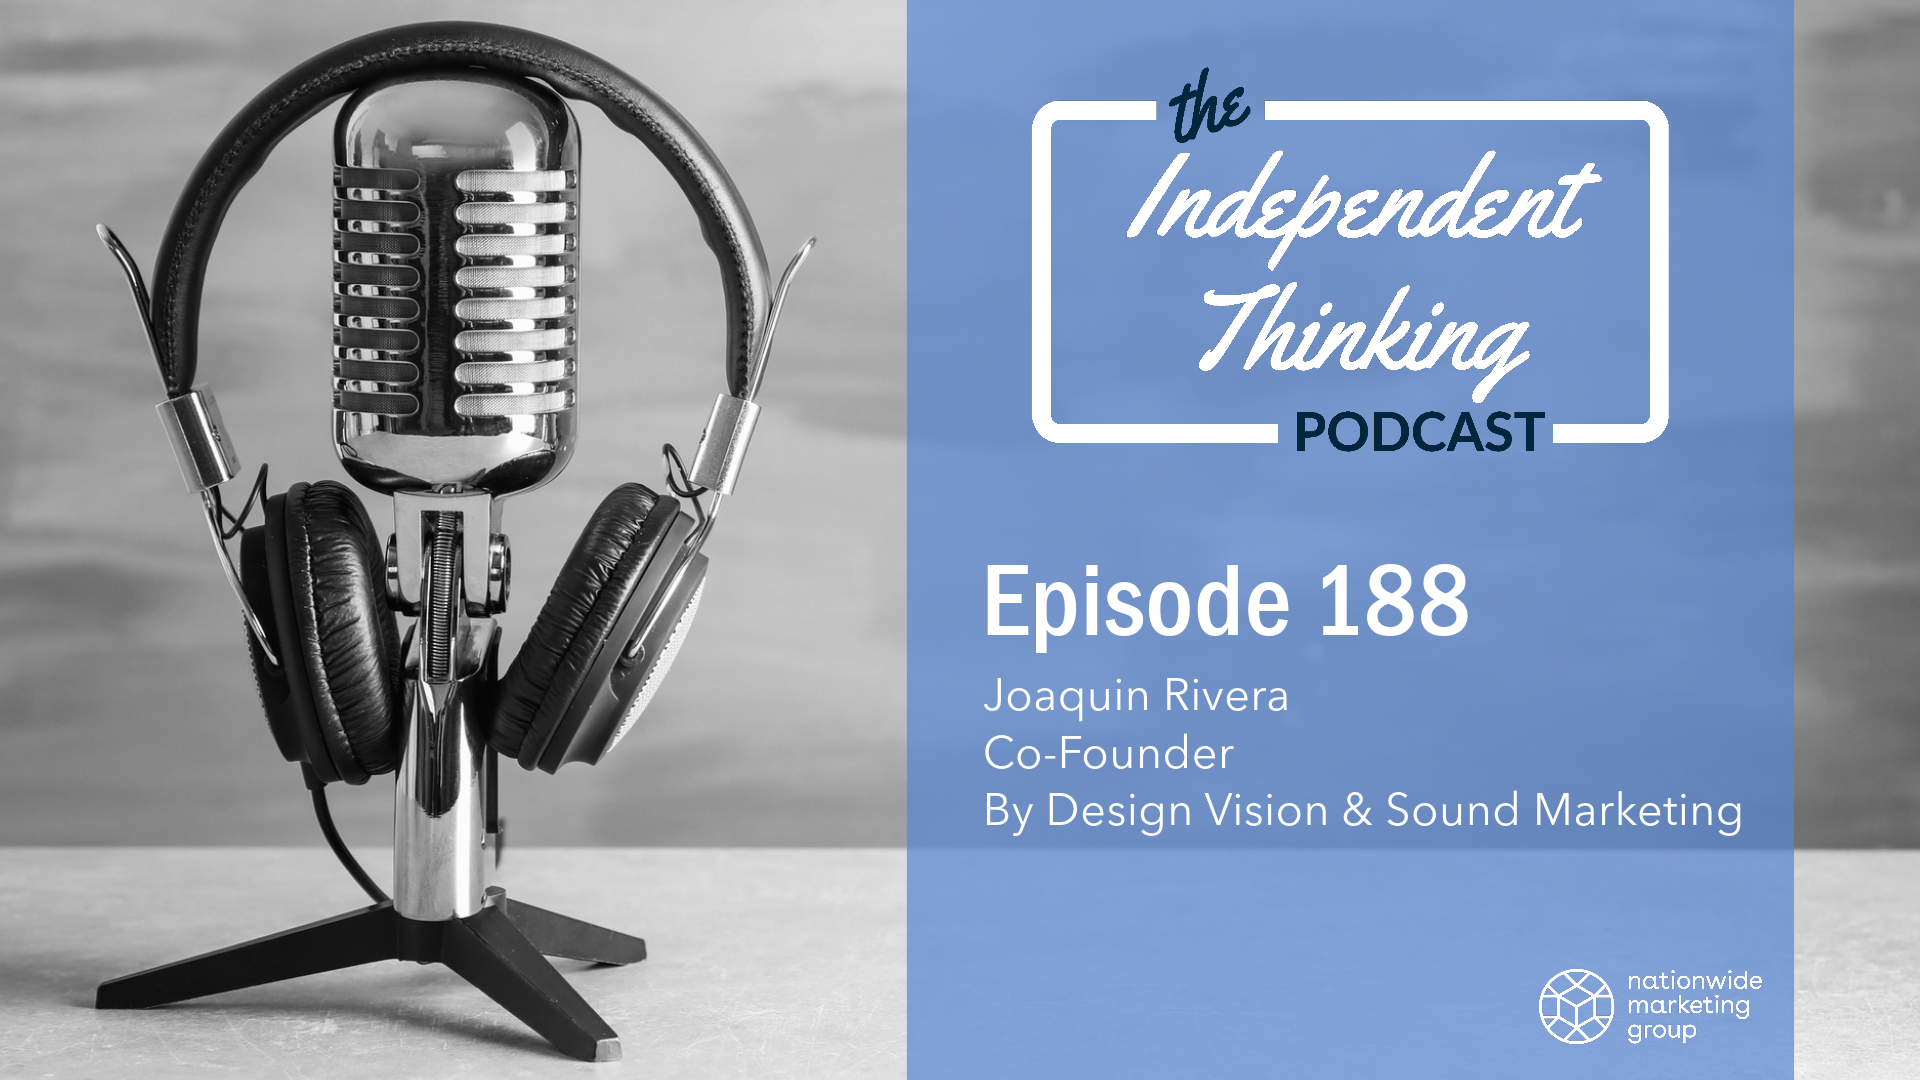 rep firms Joaquin rivera by design vision and sound marketing